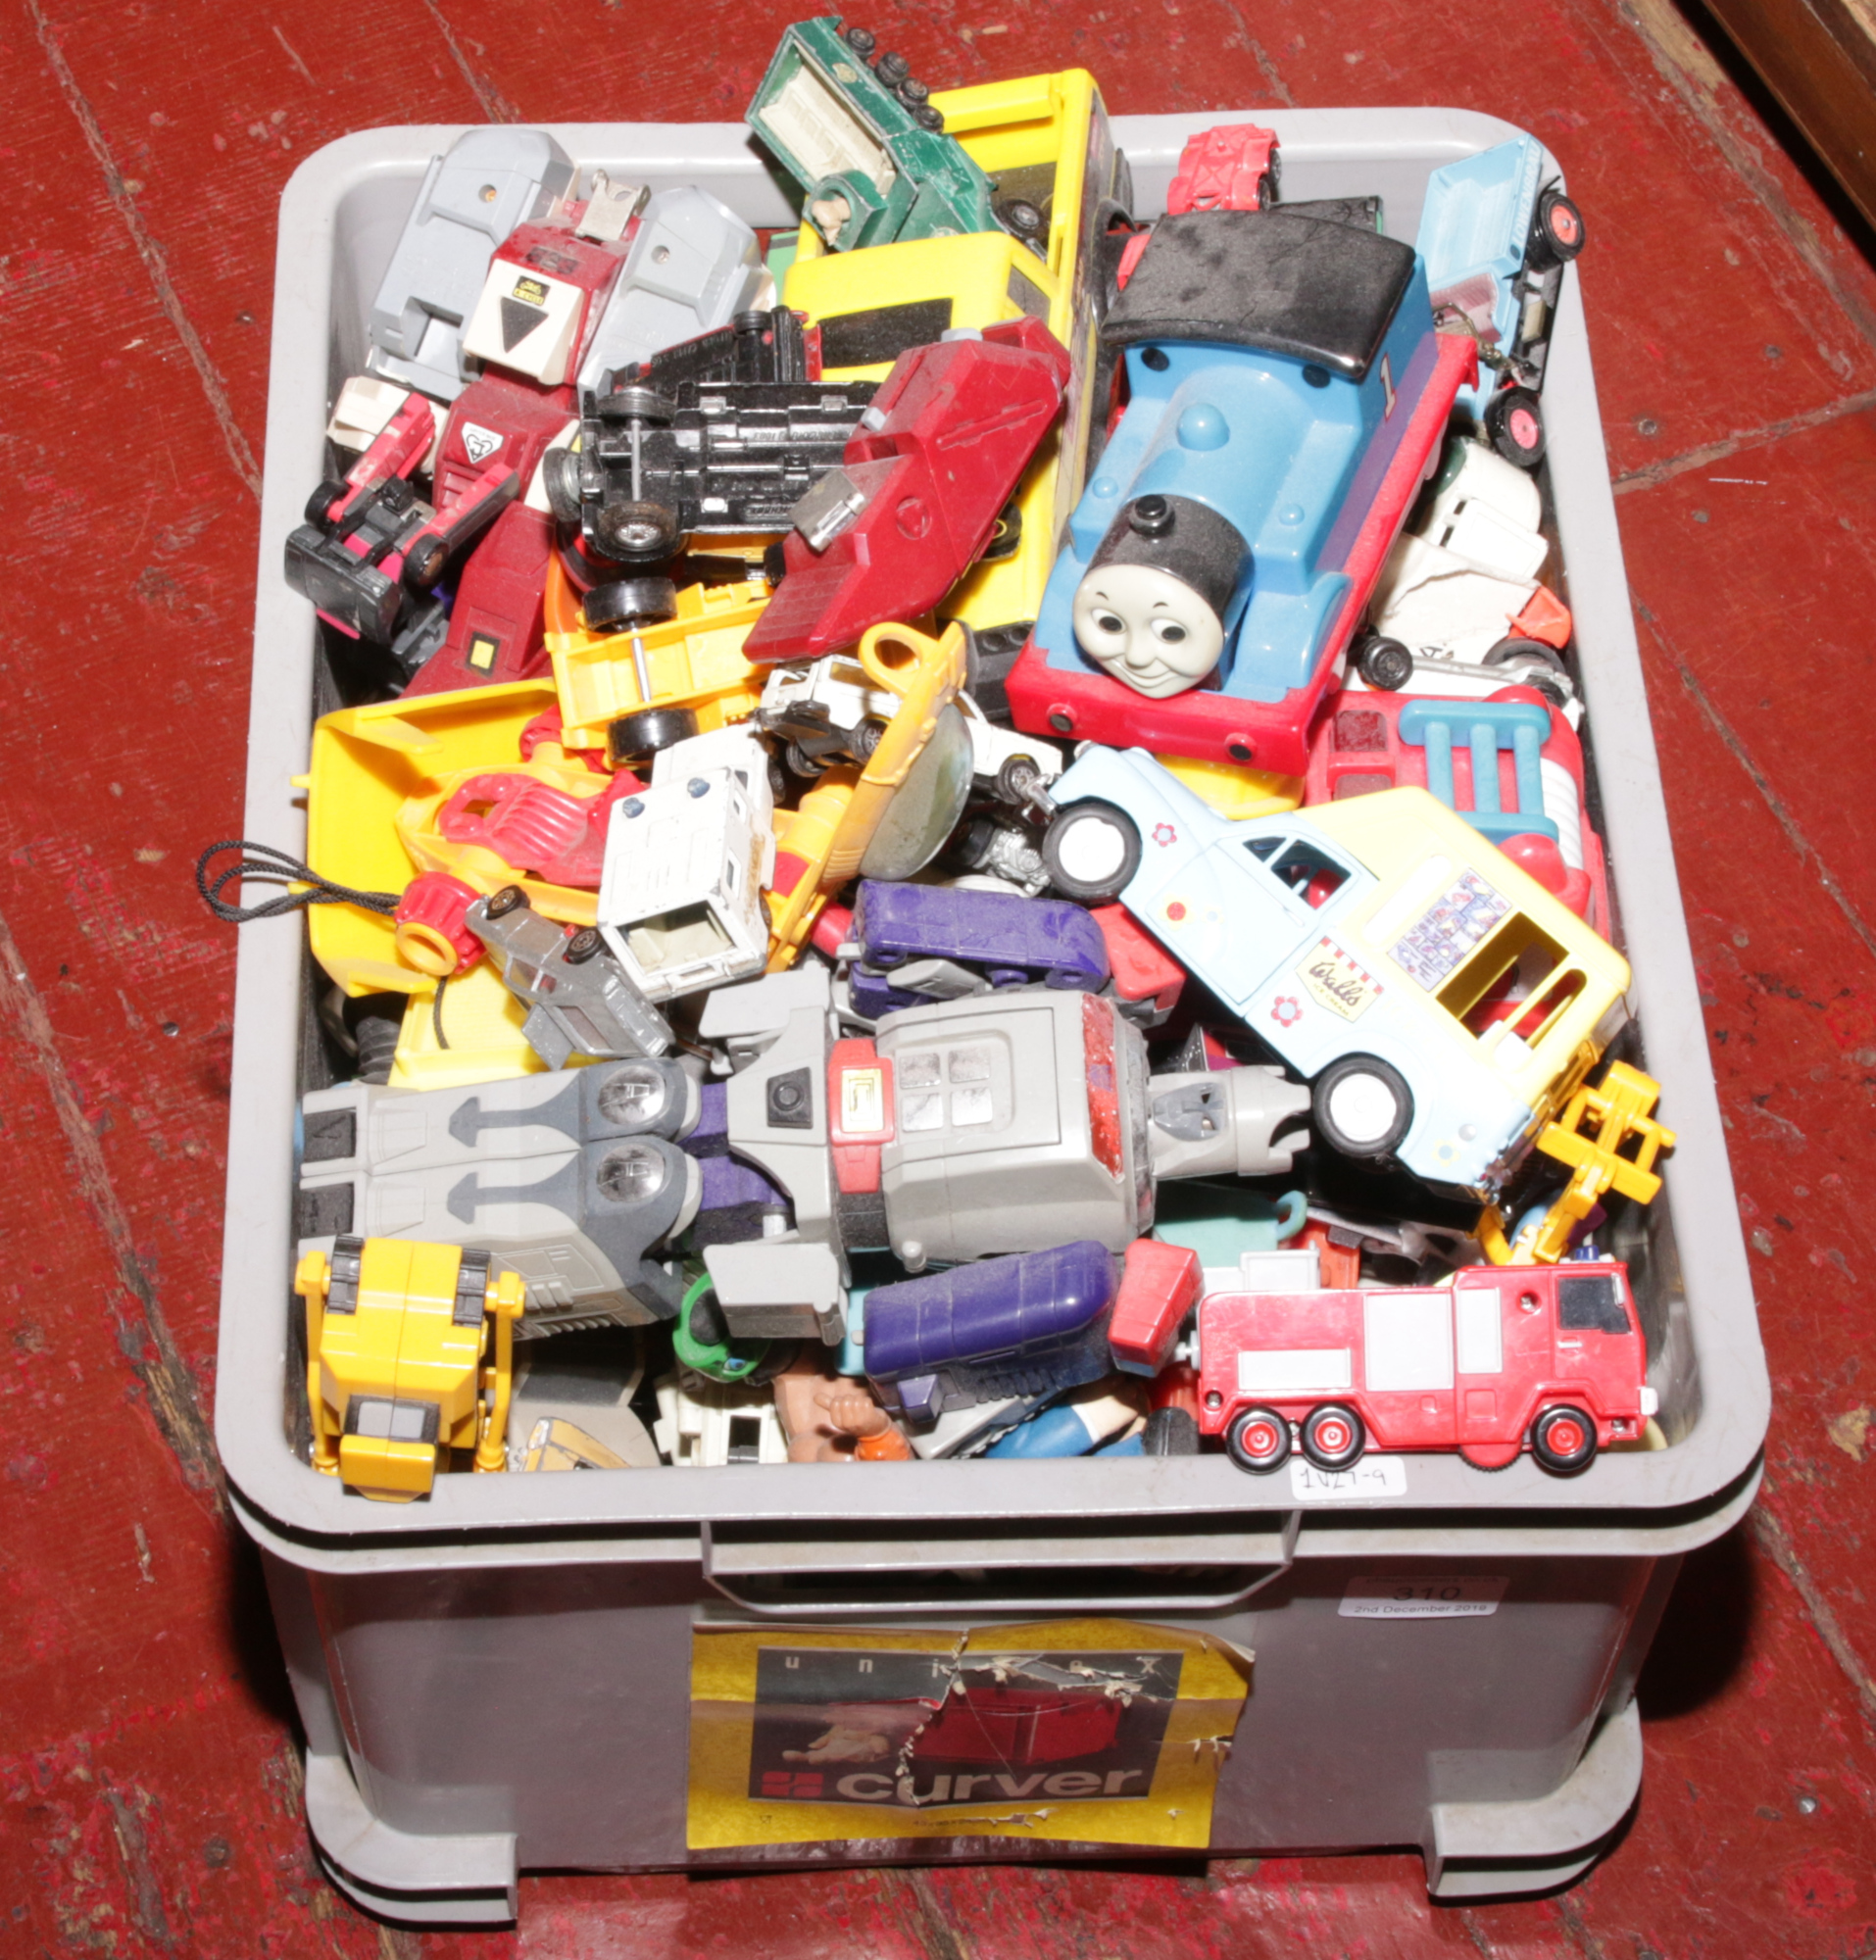 A box of Diecast and toy cars to include Tonka, Matchbox, Corgi example etc.